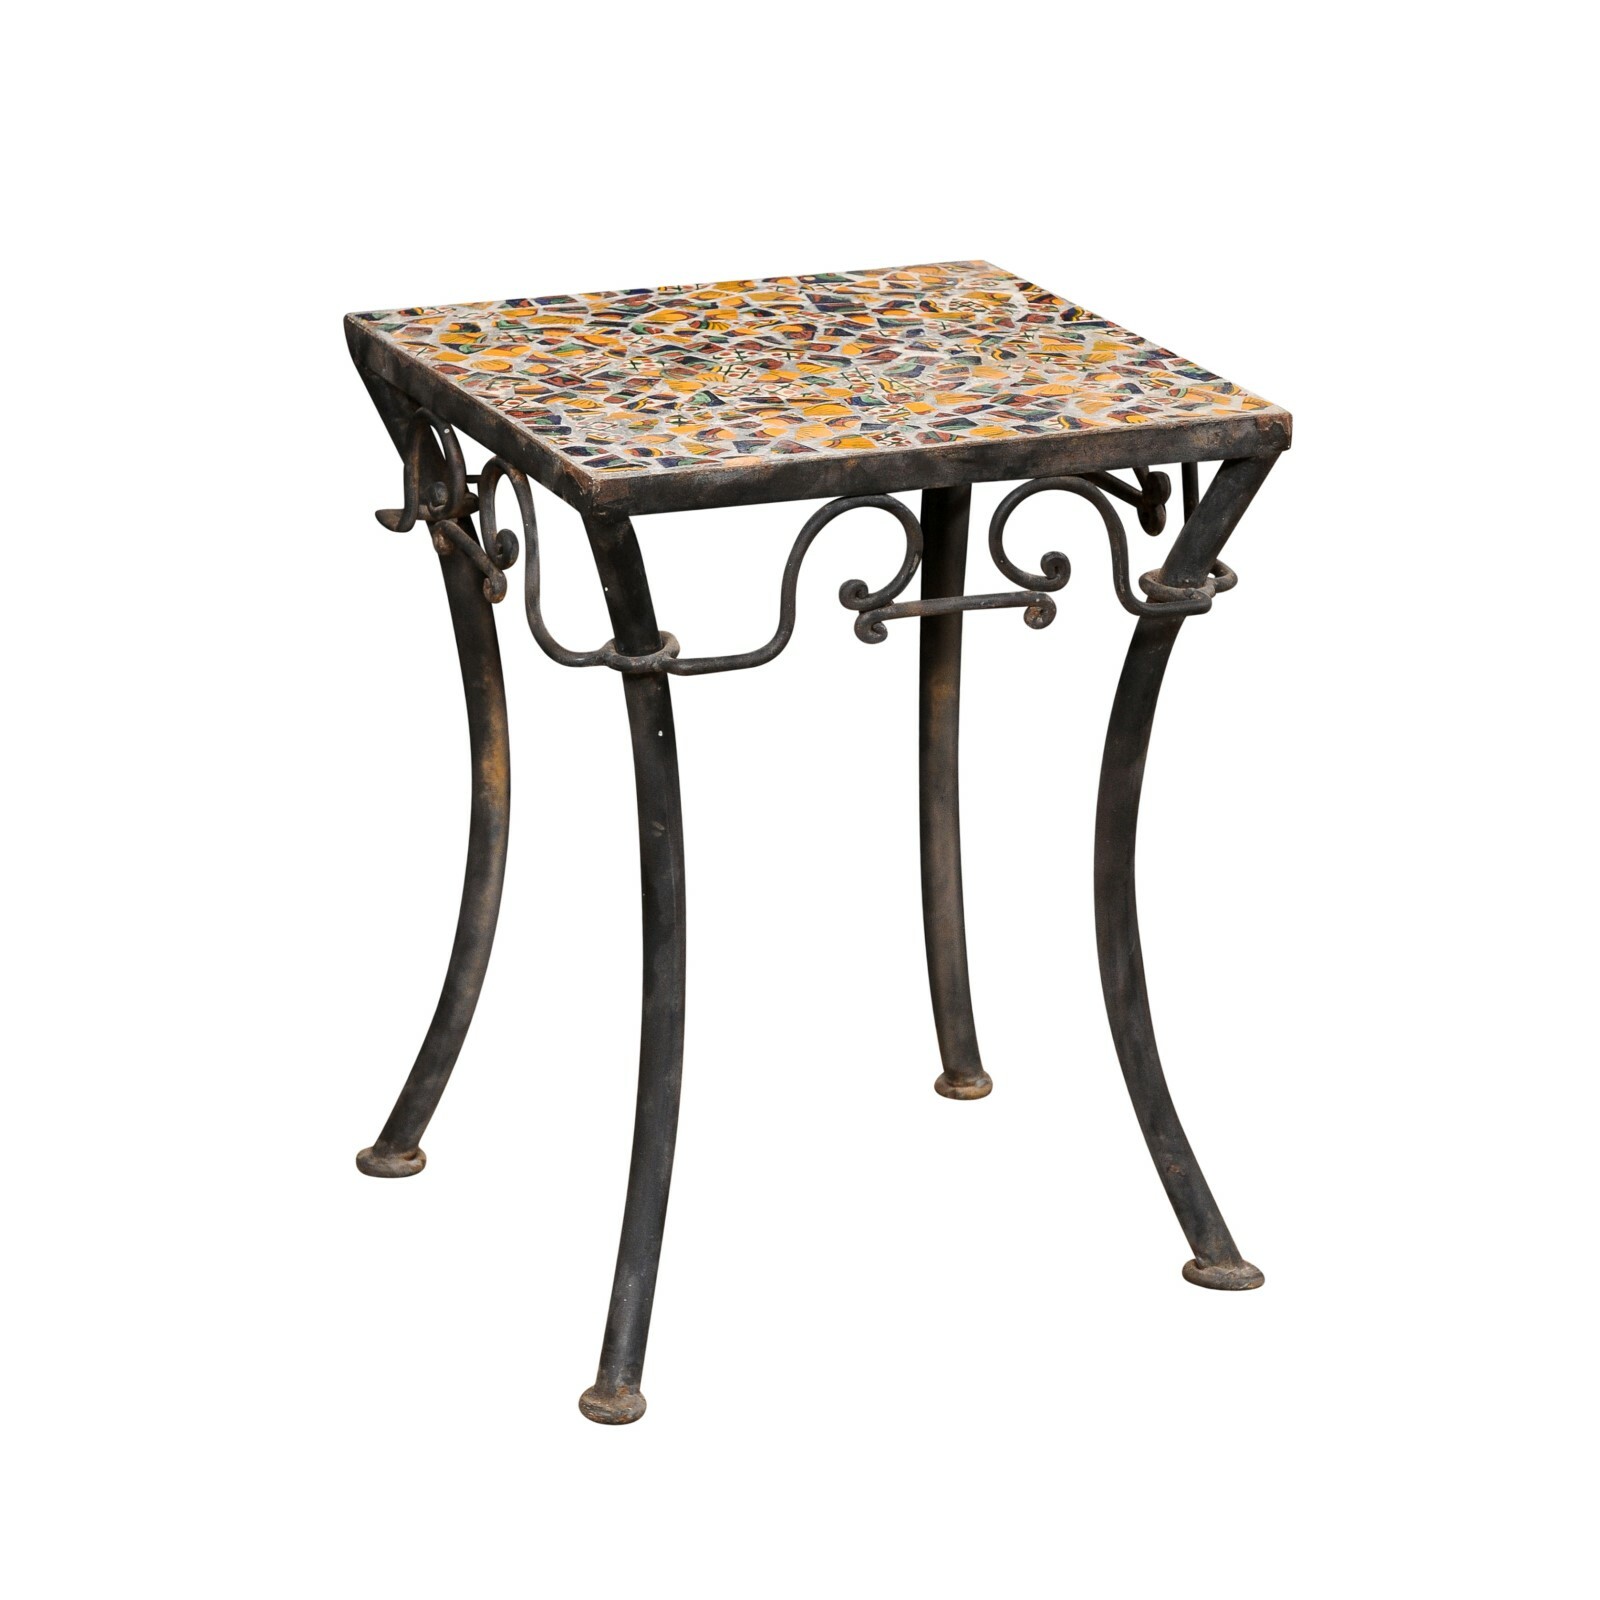 Whimsical Iron Side Table w/Mosaic Tile Top